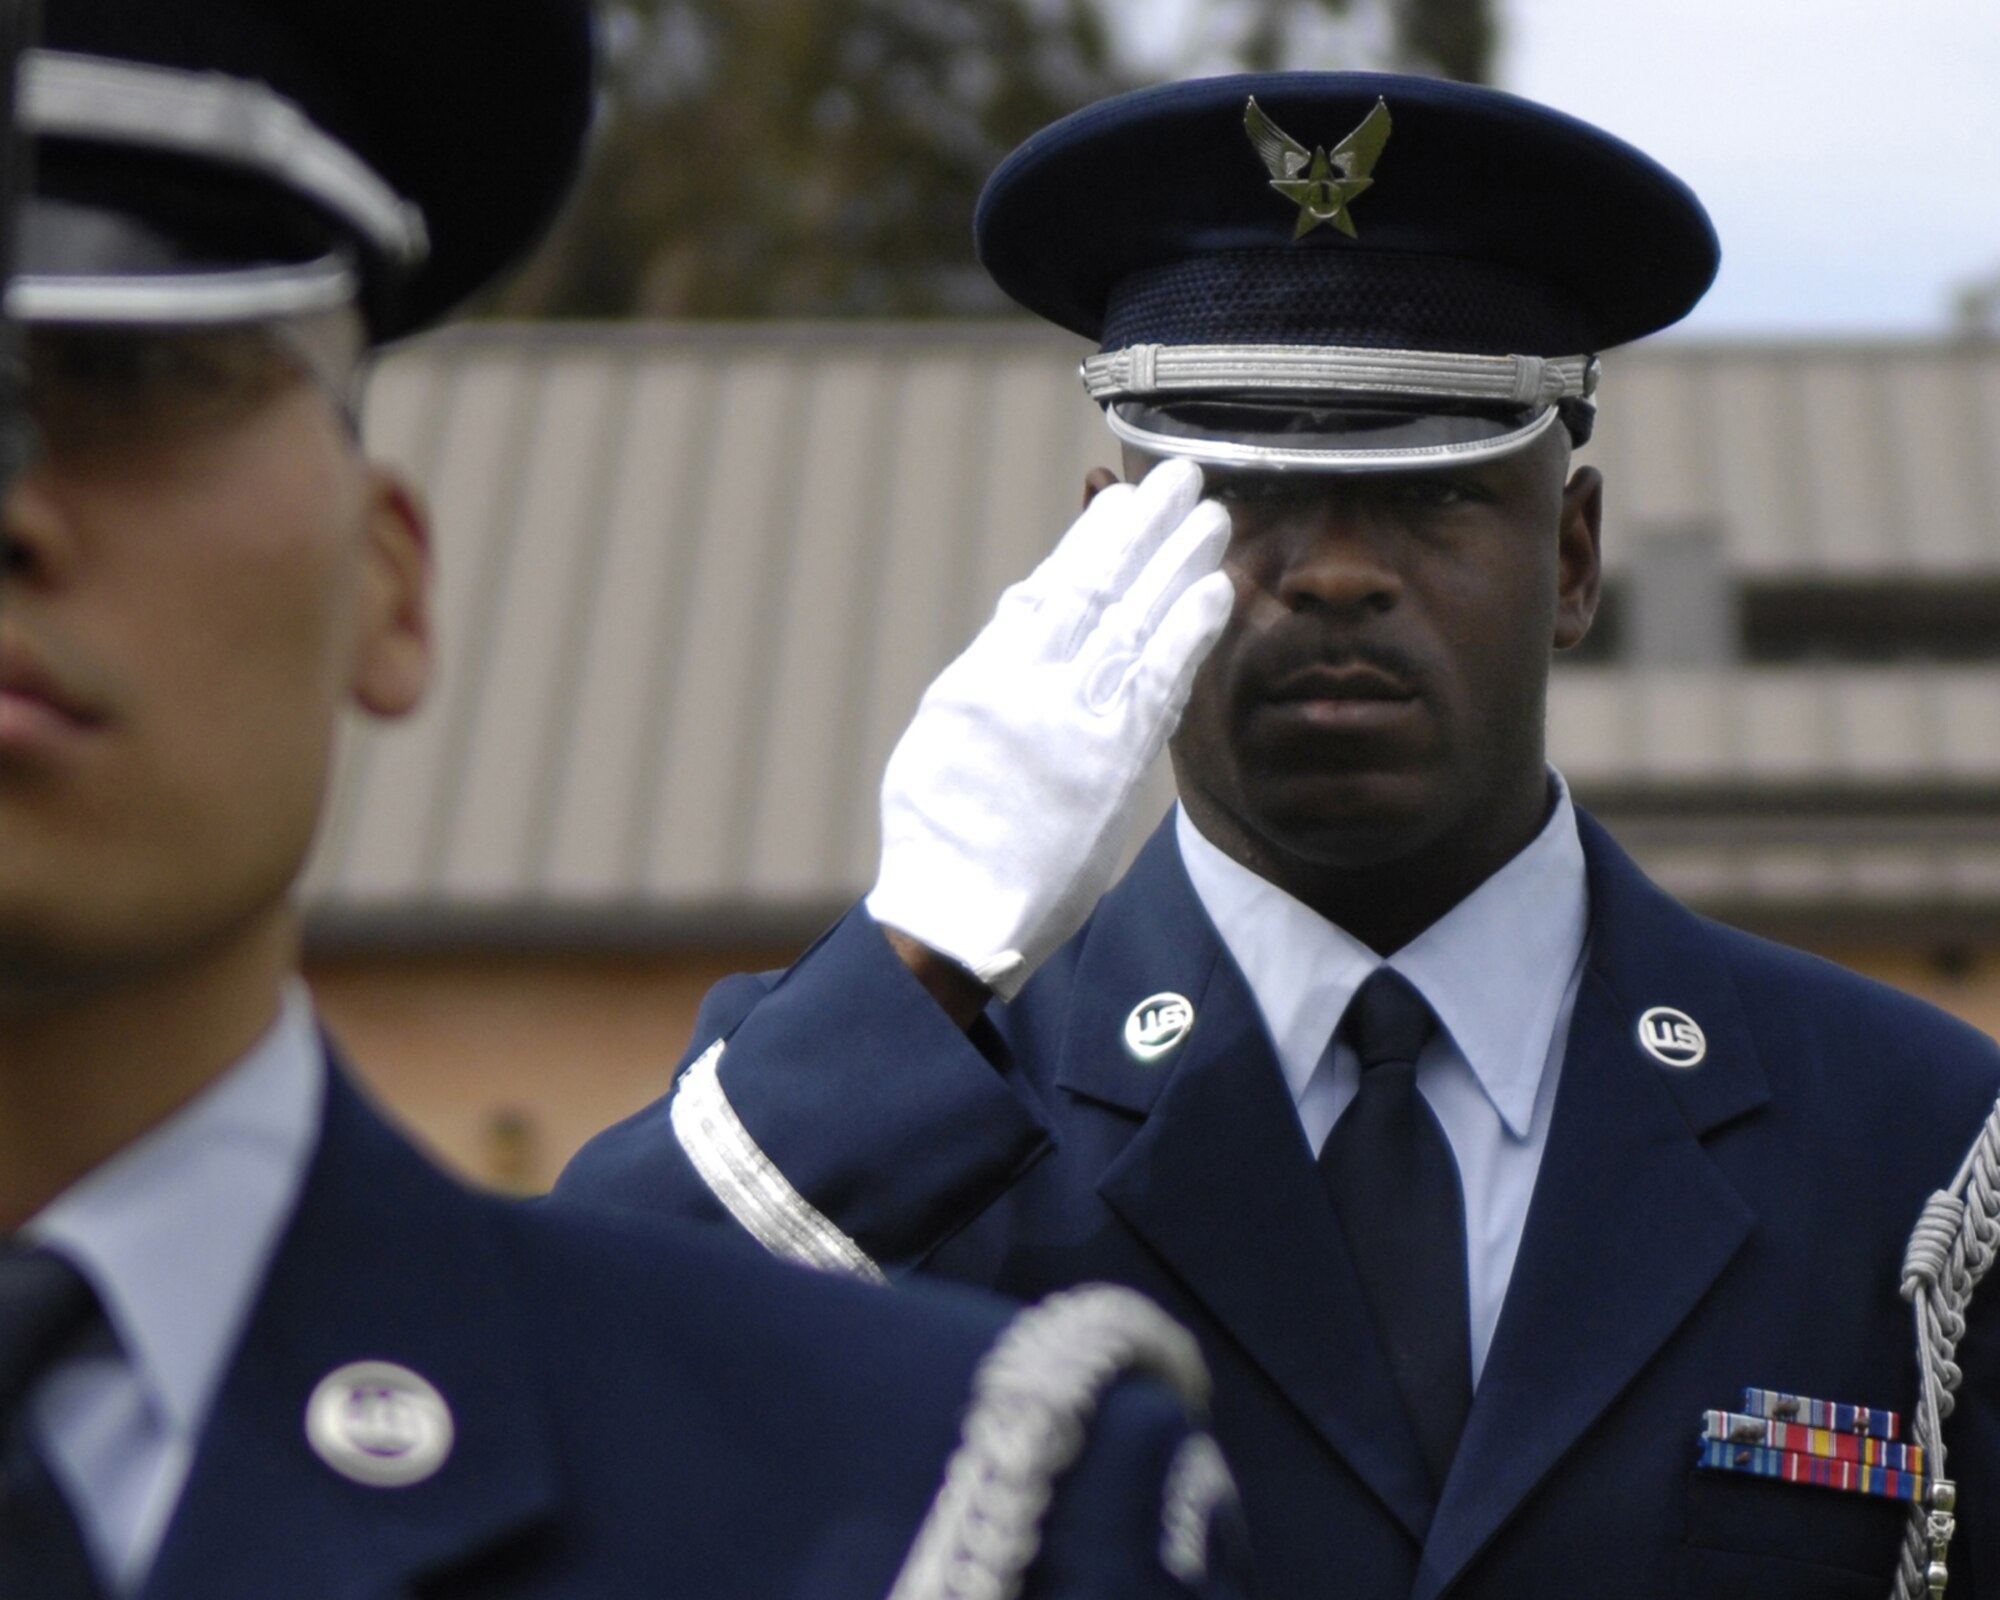 VANDENBERG AIR FORCE BASE, Calif. -- Staff Sgt. Najja Williams, a member of the Base Honor Guard, salutes during "Taps" at the POW/MIA Ceremony on September 21 at Vandenberg.  Vandenberg gathered for the remembrance ceremony to honor fallen Airmen, Soldiers, Seamen and Marines. (U.S. Air Force photo/Airman Jonathan Olds)
